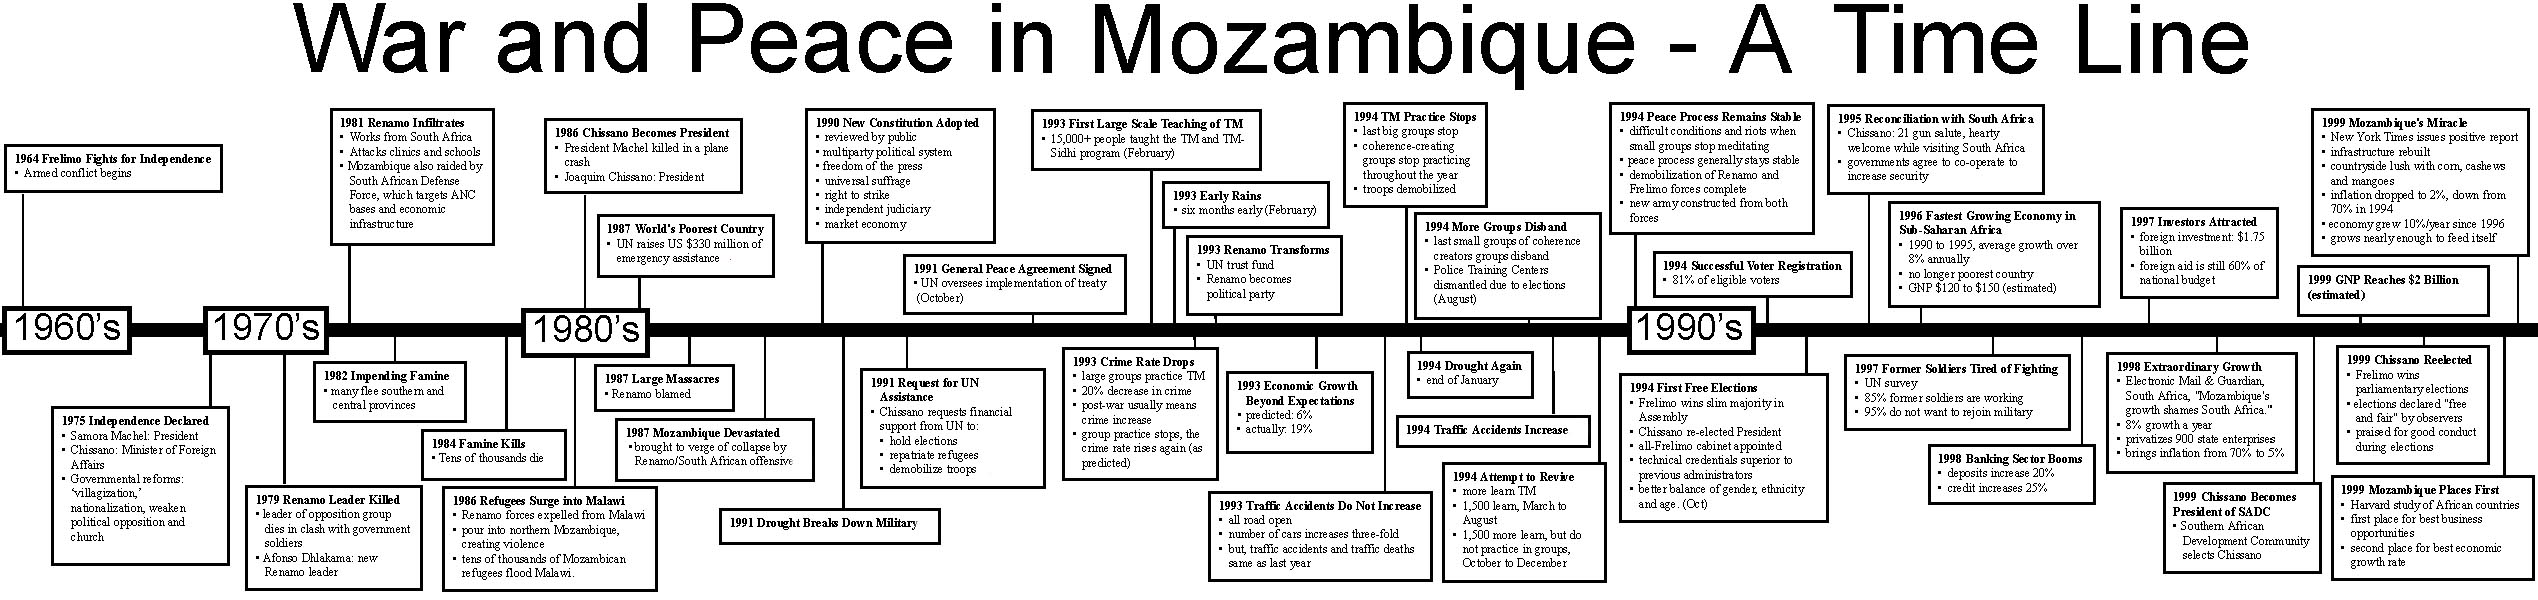 Timeline of Mozambique History since 1964